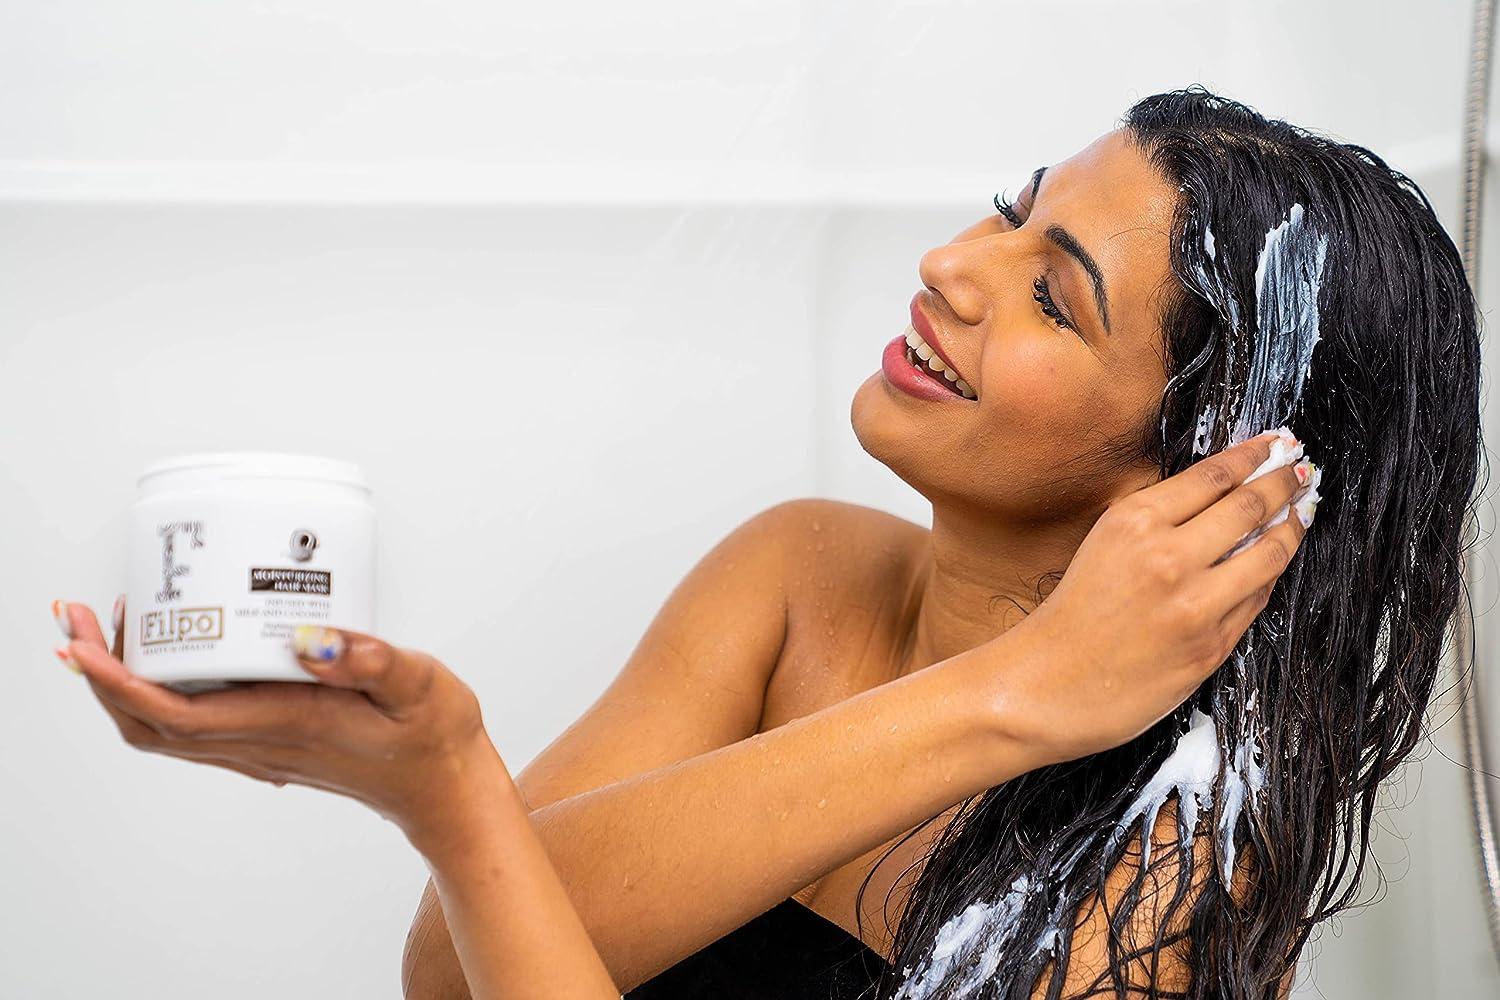 Coconut milk hair mask for dry and damaged hair